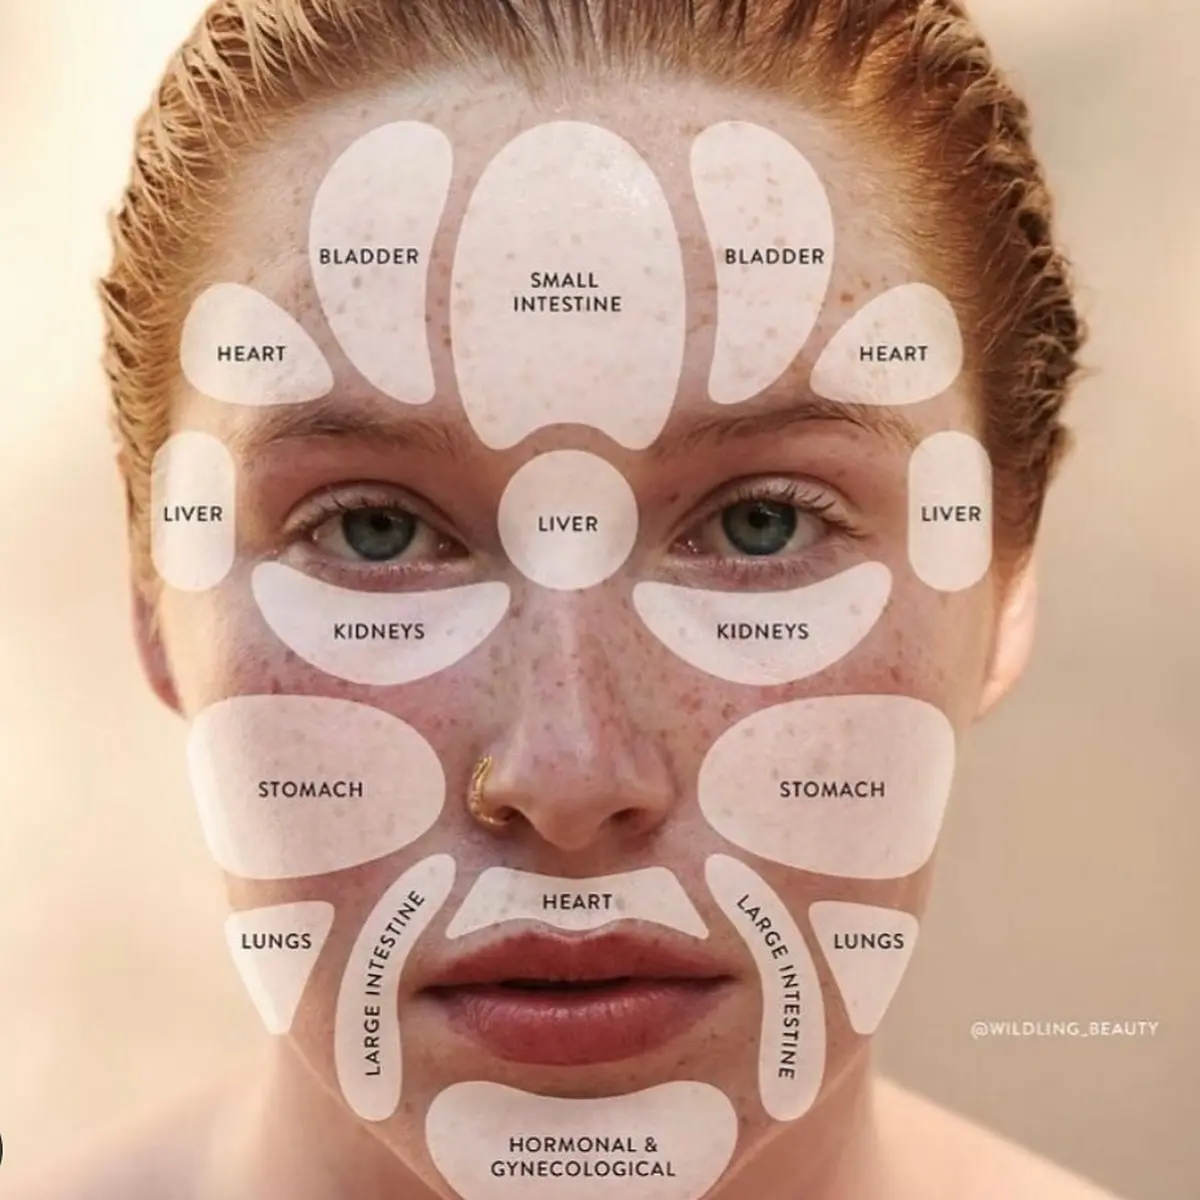 location of acne on face meaning